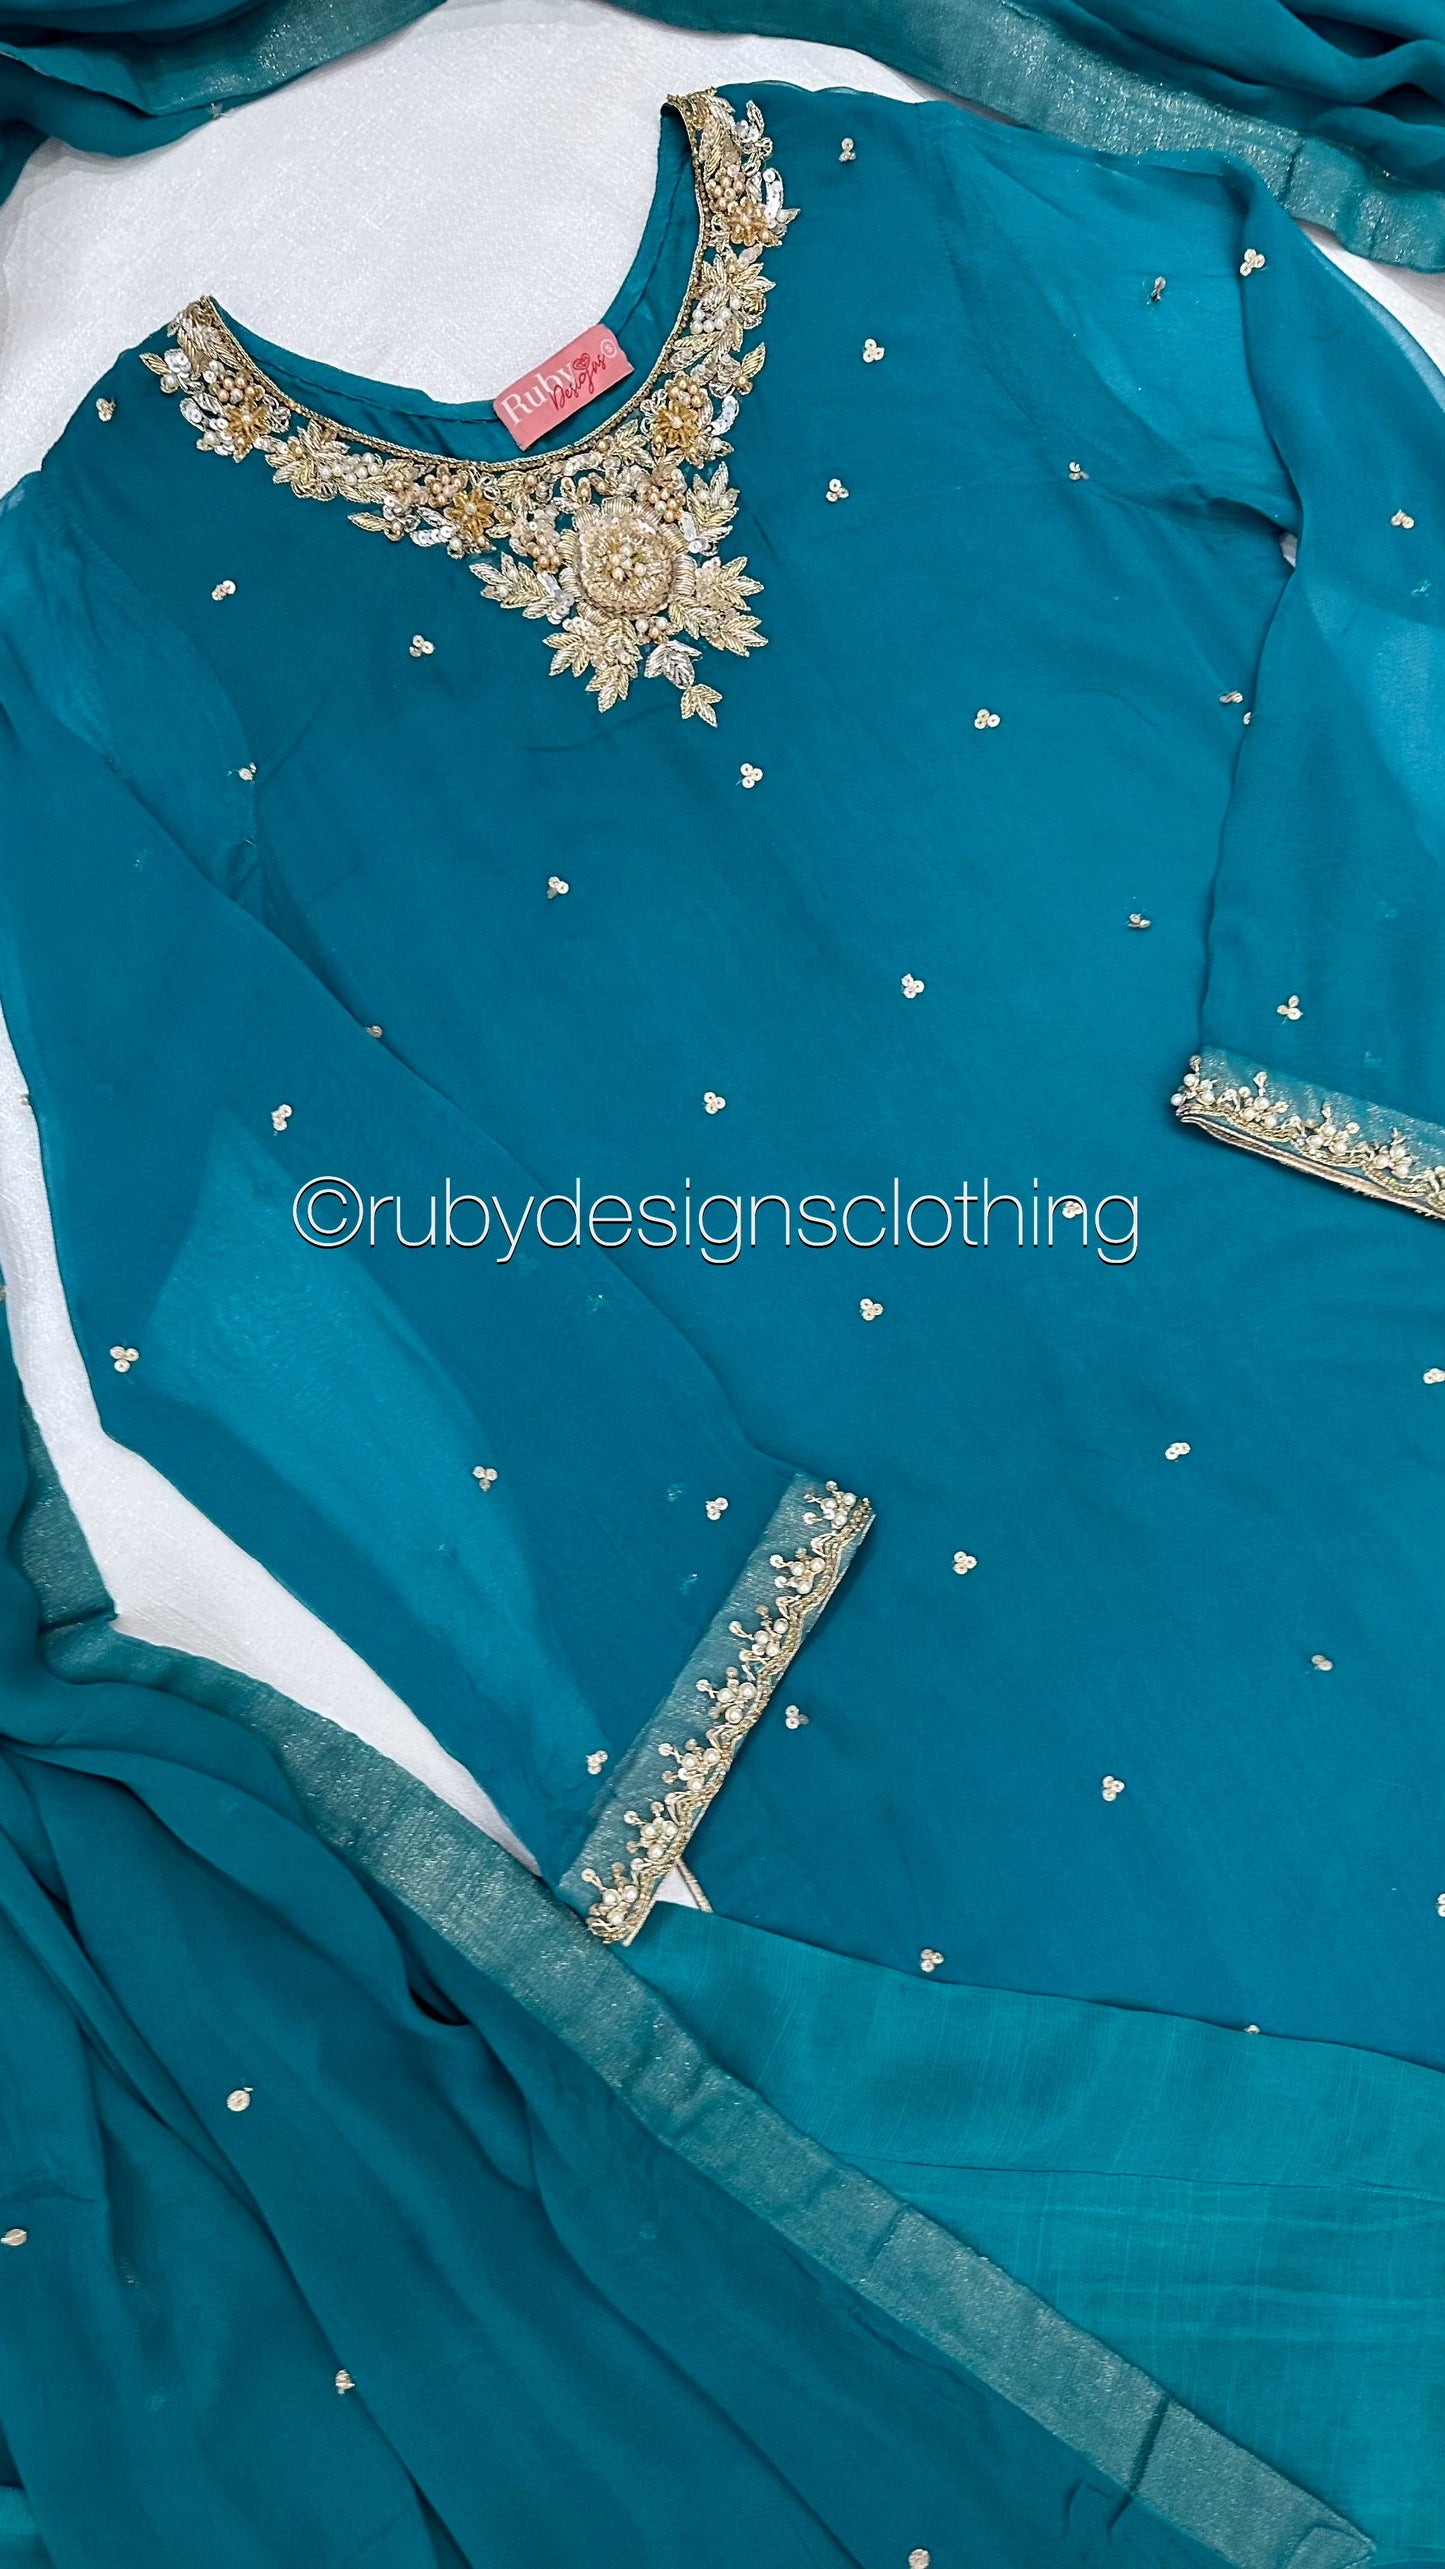 ALVIA Teal - 3 Piece Teal Chiffon Suit with Gold Handwork